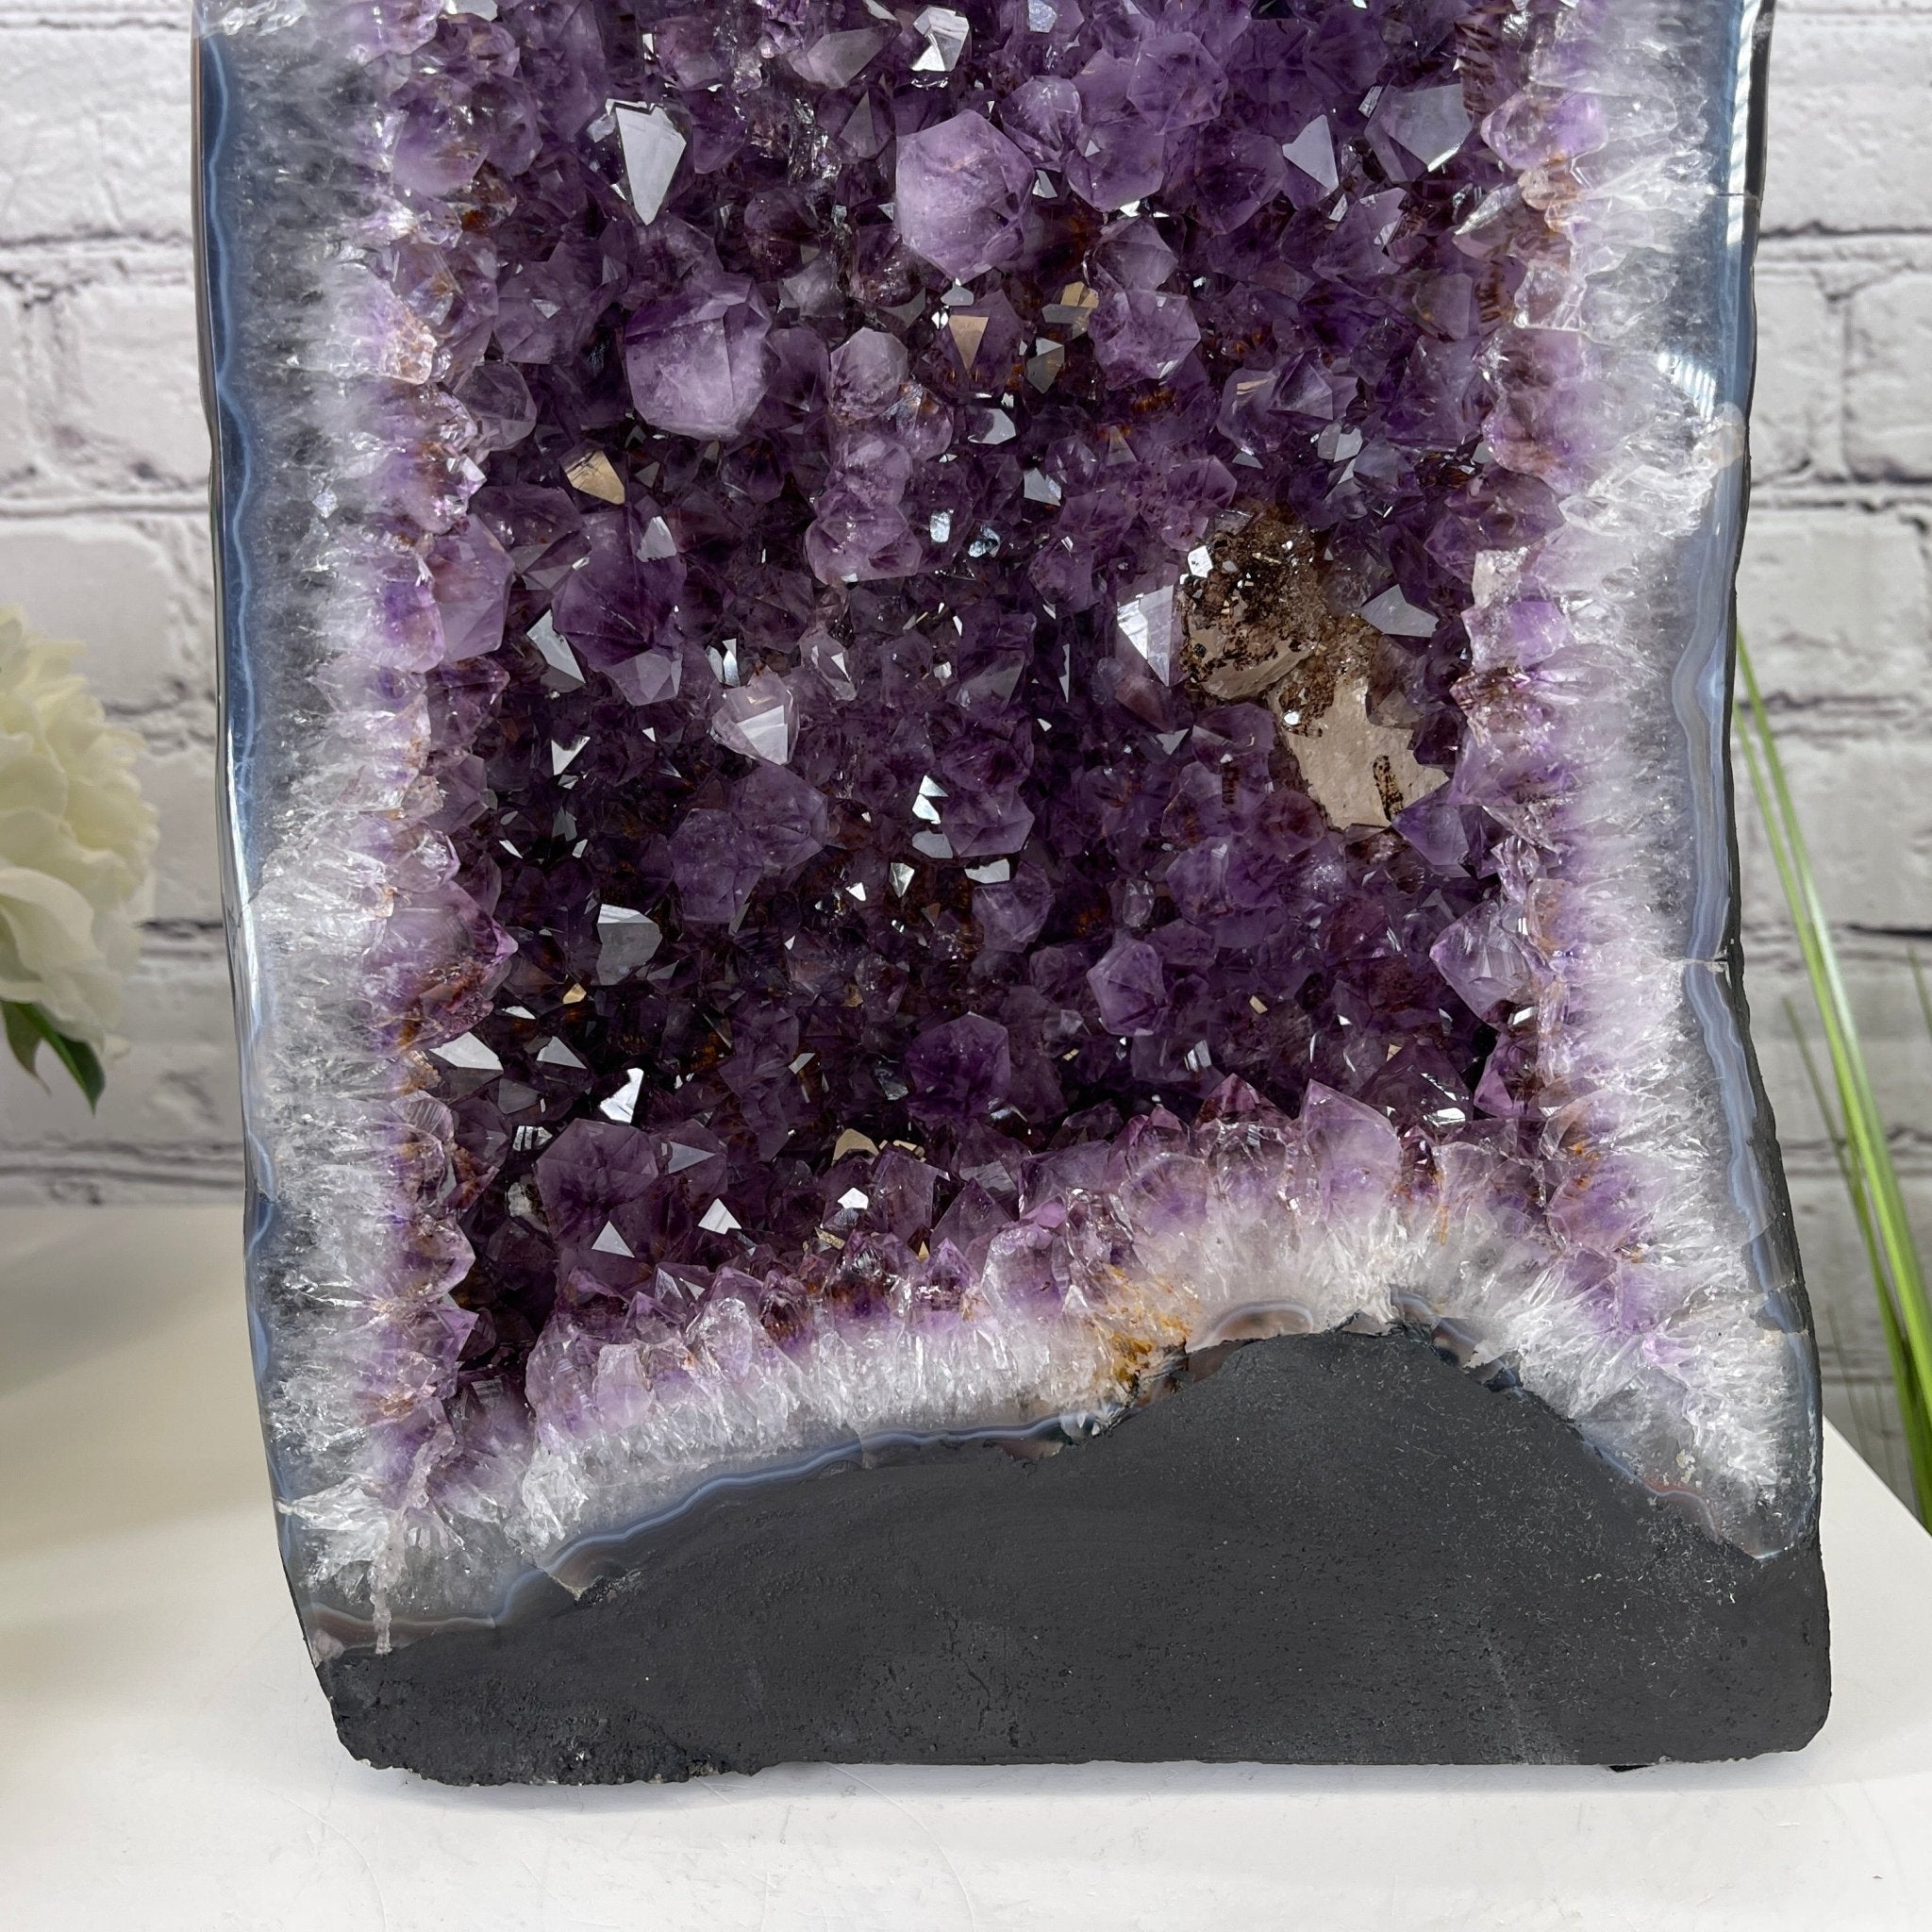 Extra Quality Brazilian Amethyst Cathedral, 15” tall & 27.9 lbs #5601-0477 by Brazil Gems - Brazil GemsBrazil GemsExtra Quality Brazilian Amethyst Cathedral, 15” tall & 27.9 lbs #5601-0477 by Brazil GemsCathedrals5601-0477